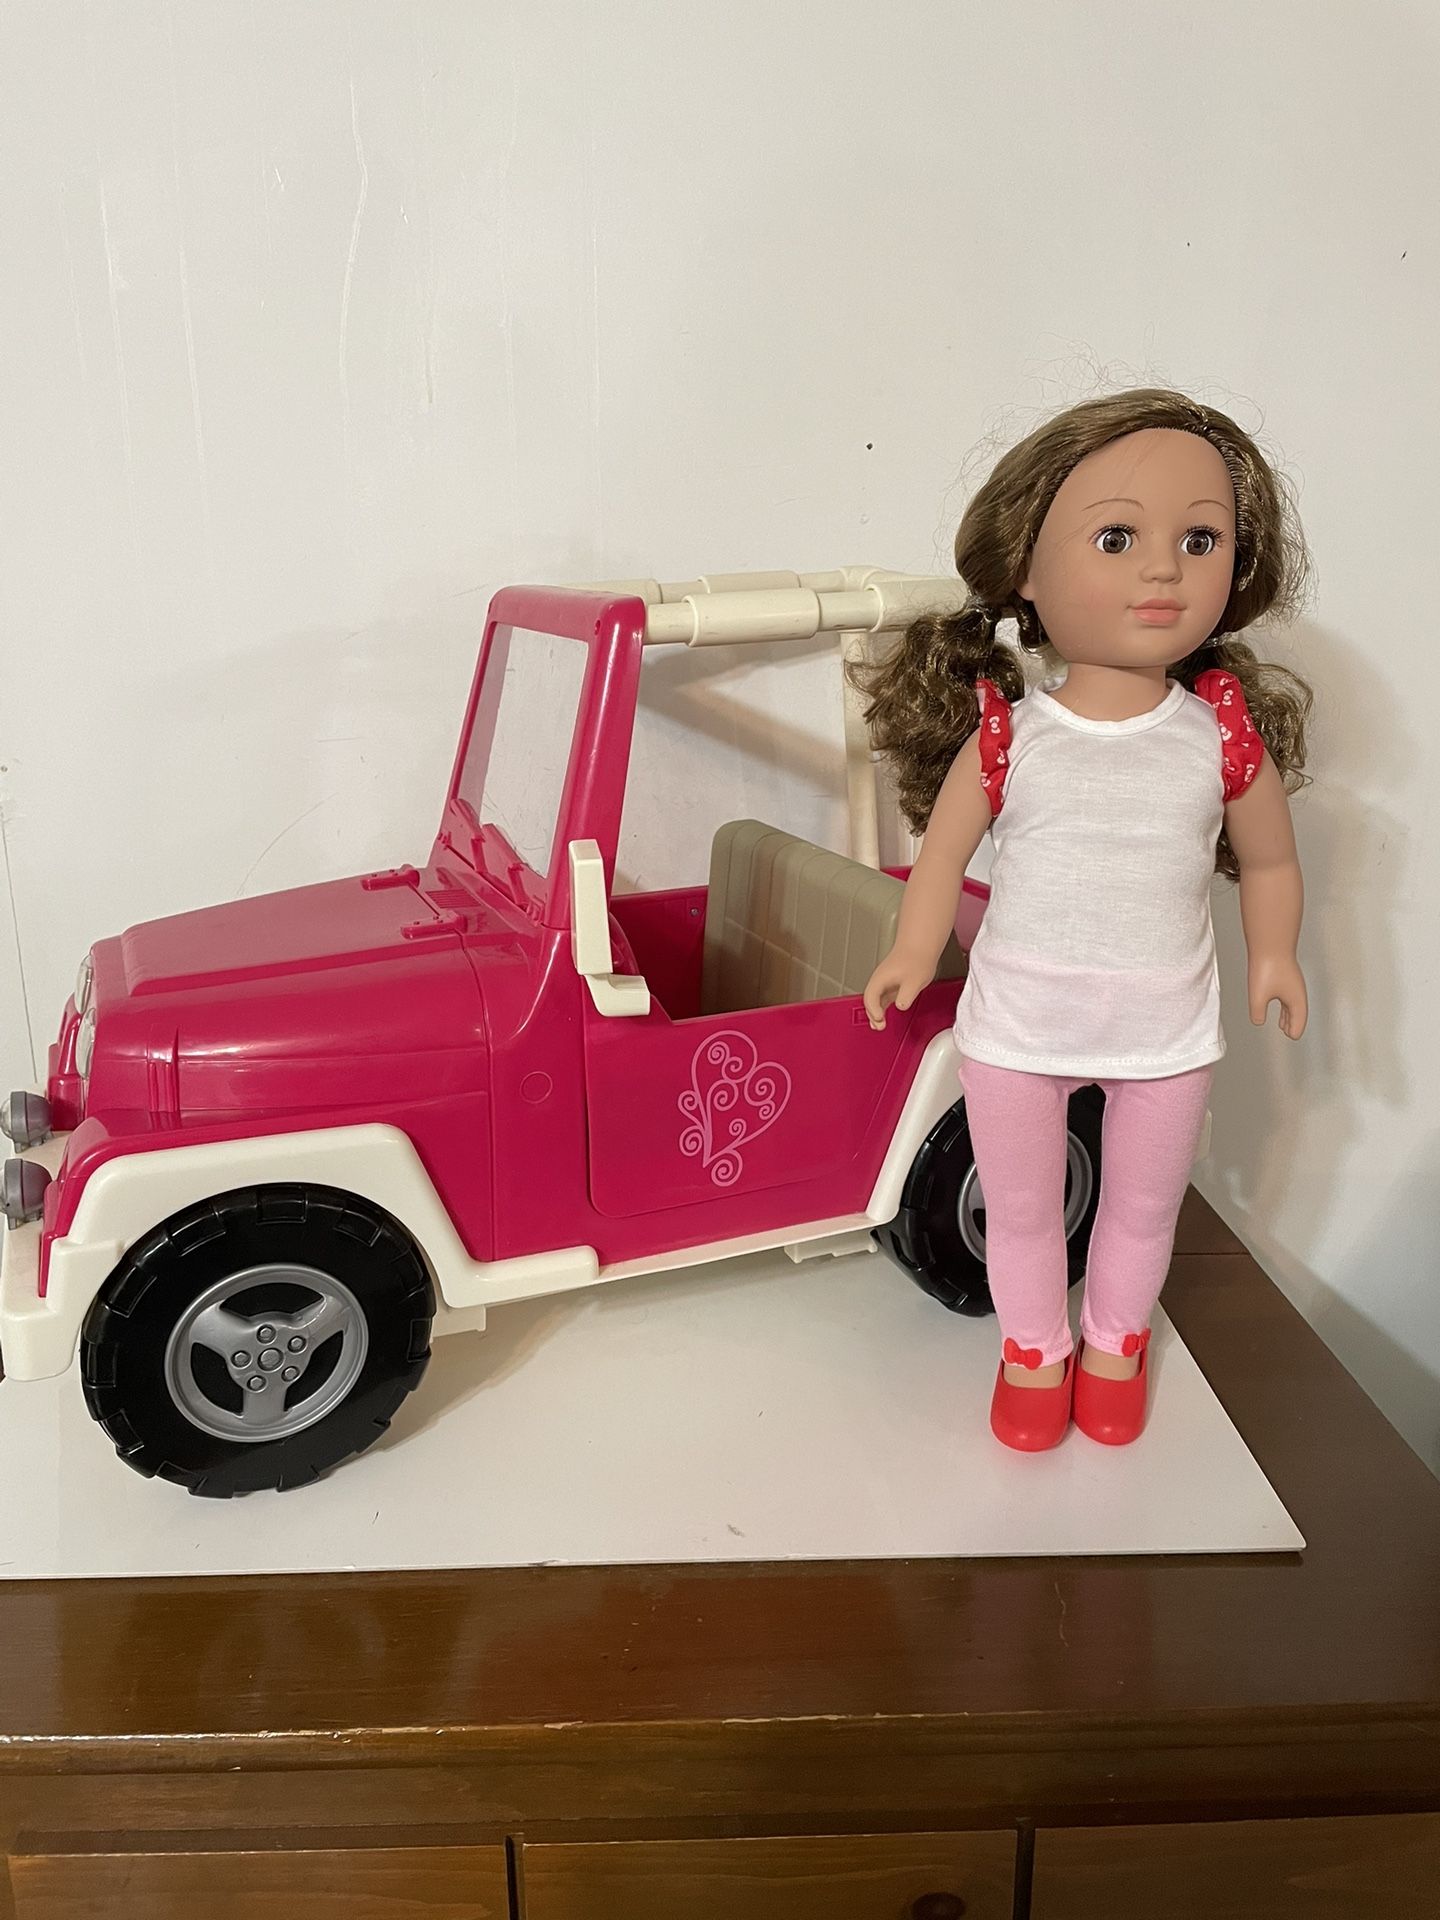 Doll And Jeep Very Cute- Used